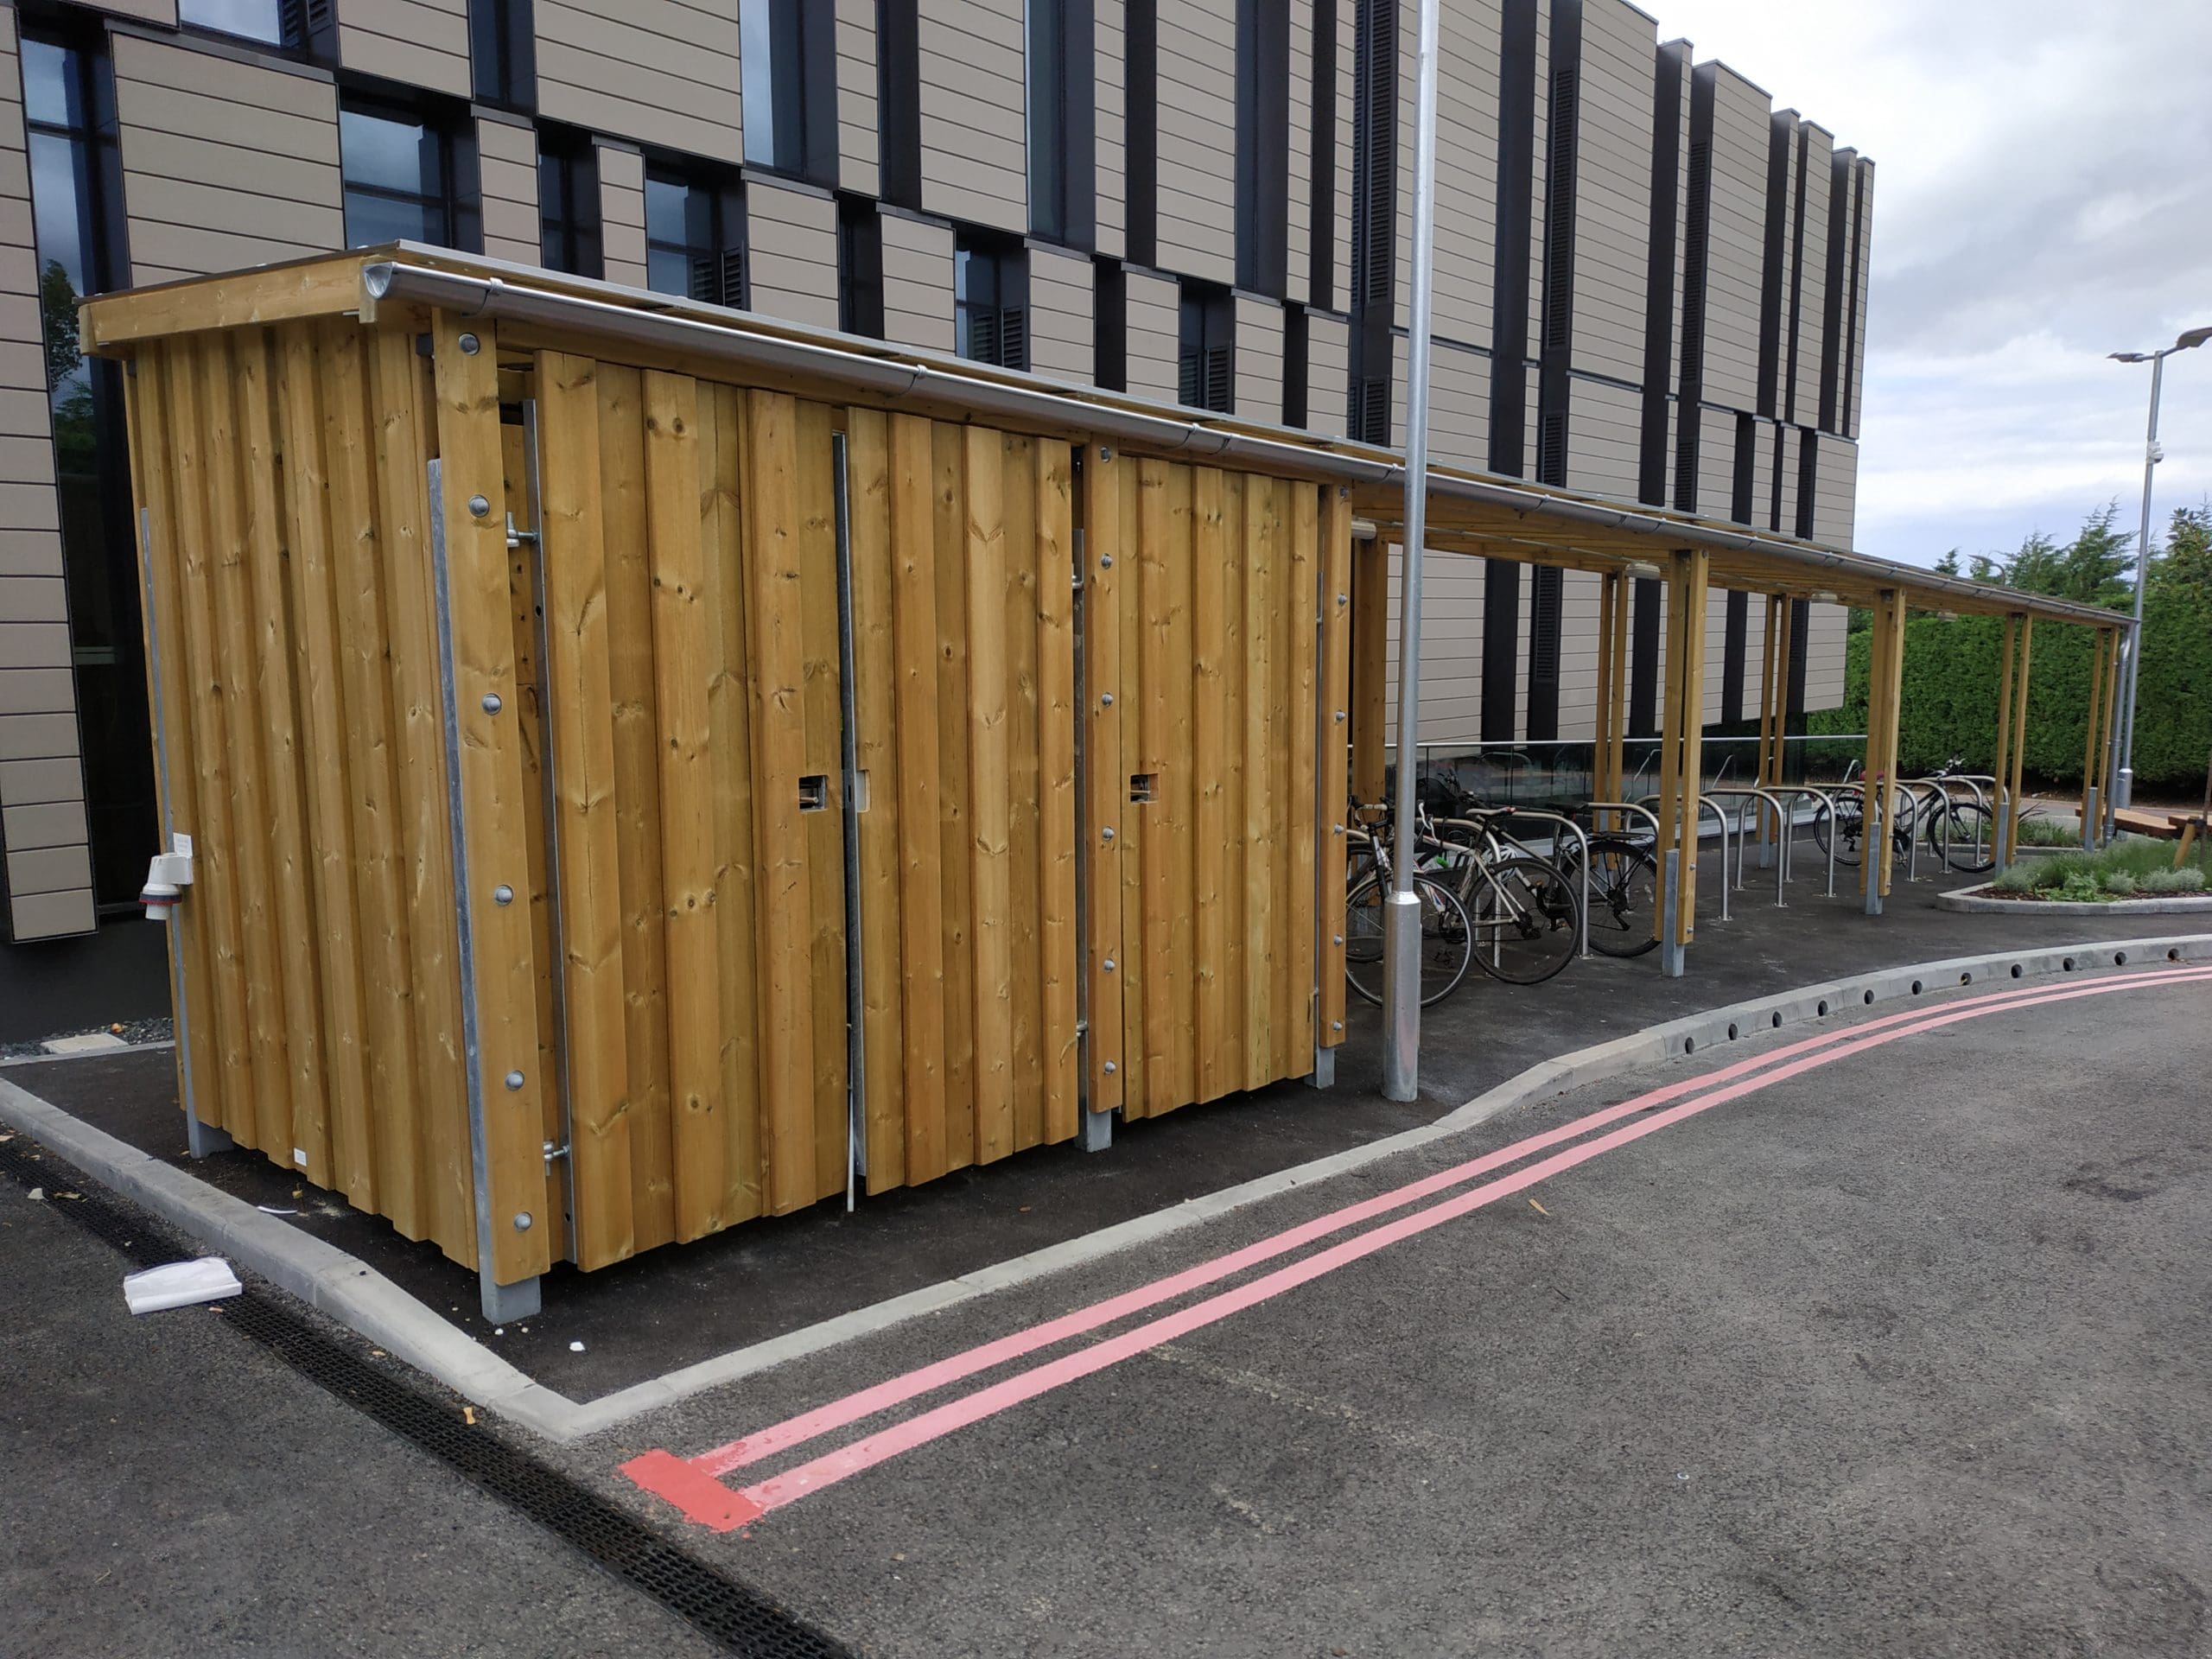 Exterior cycle parking and bin store wooden structure